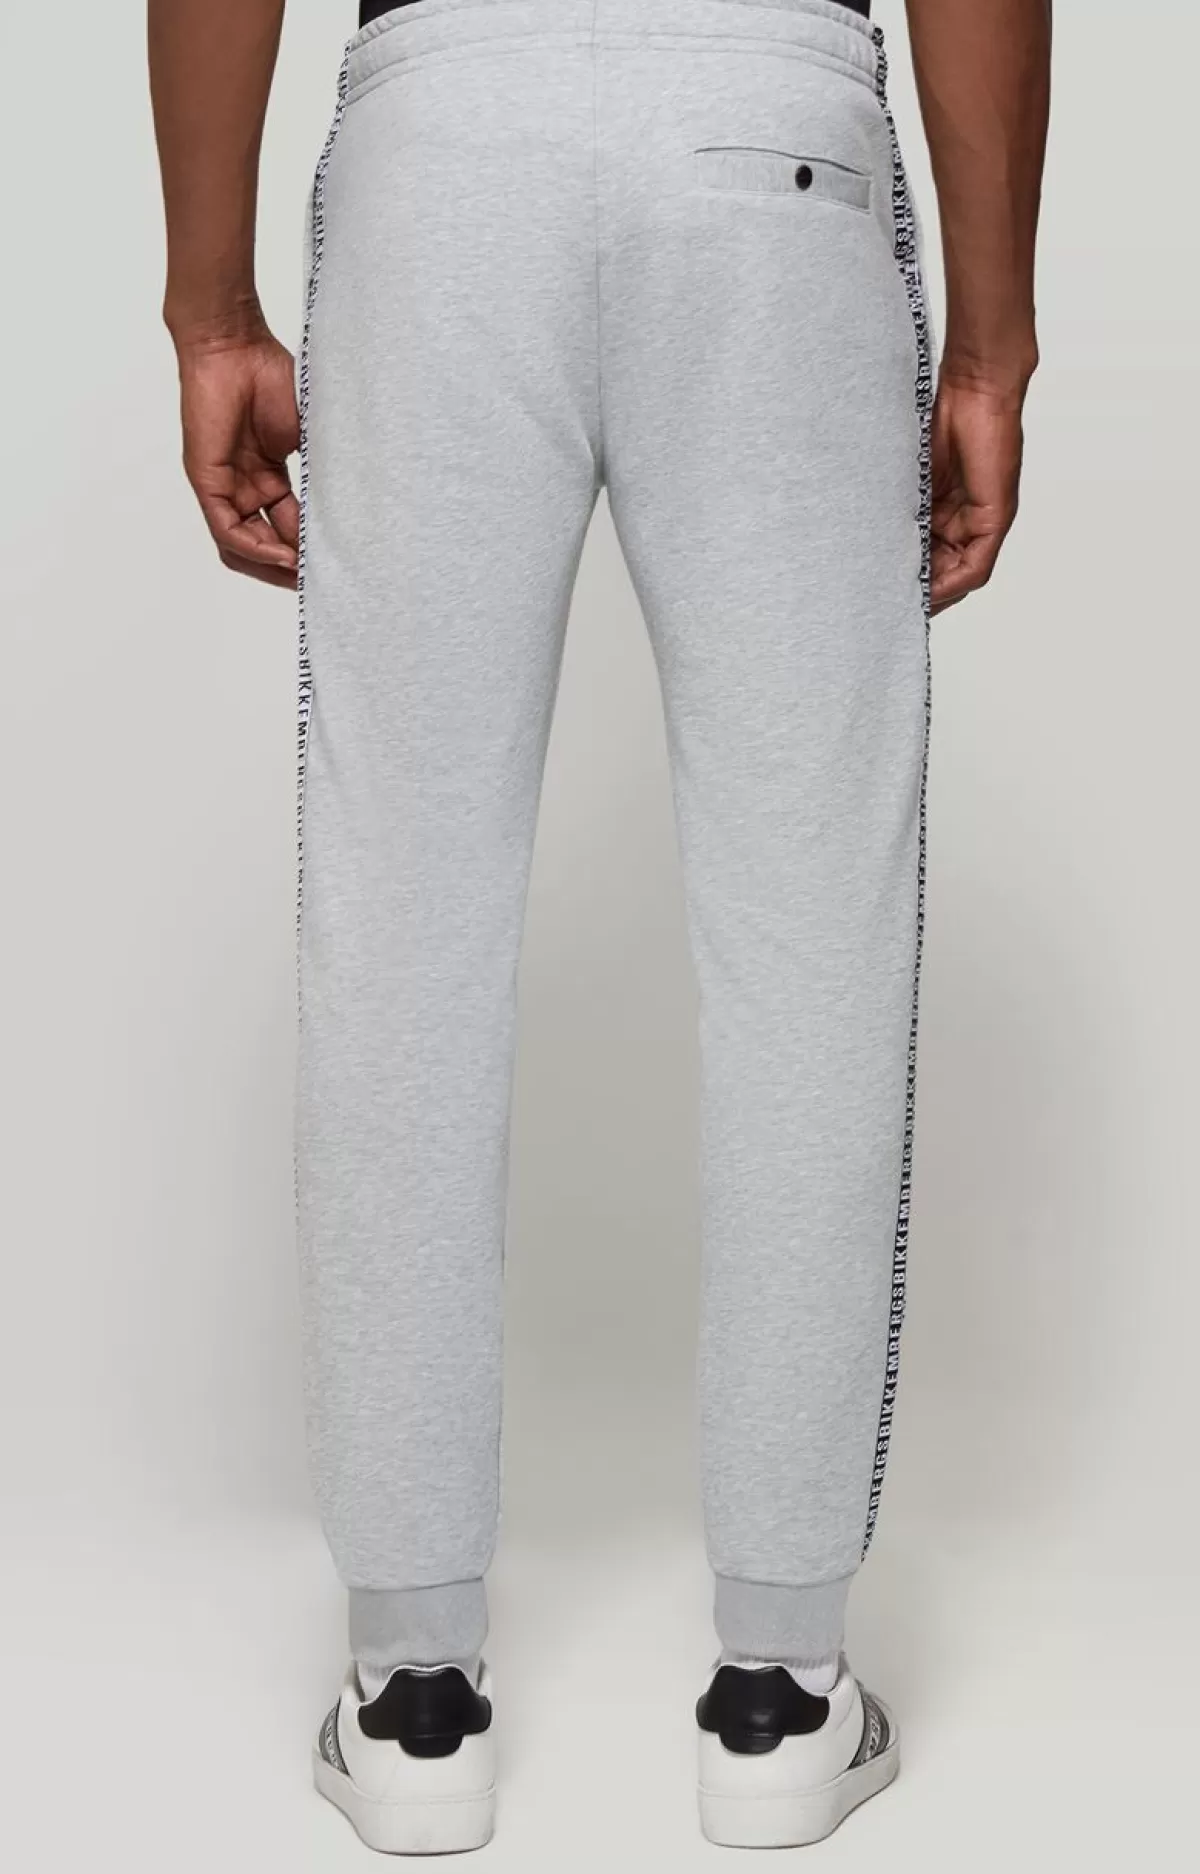 Bikkembergs Men'S Joggers With Double Tape Optical White Online